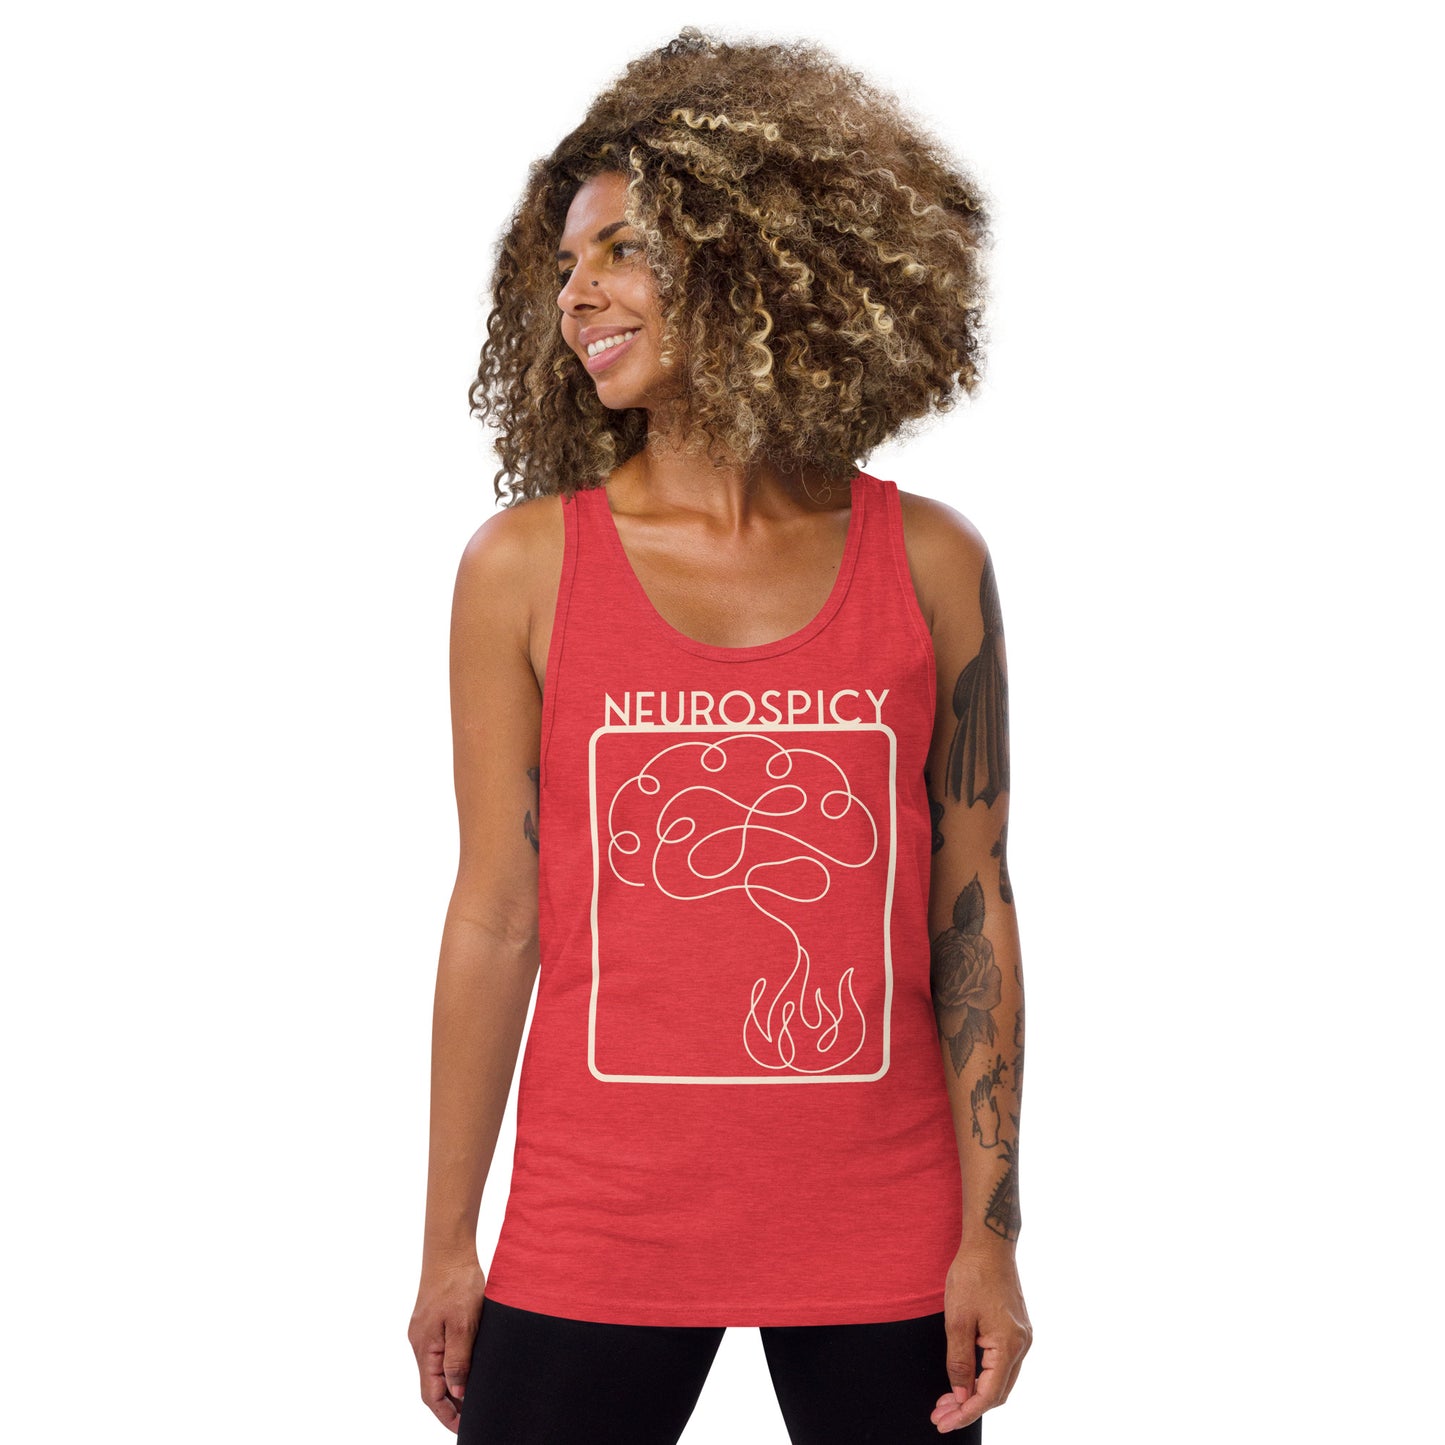 Neurospicy Muscle Tank